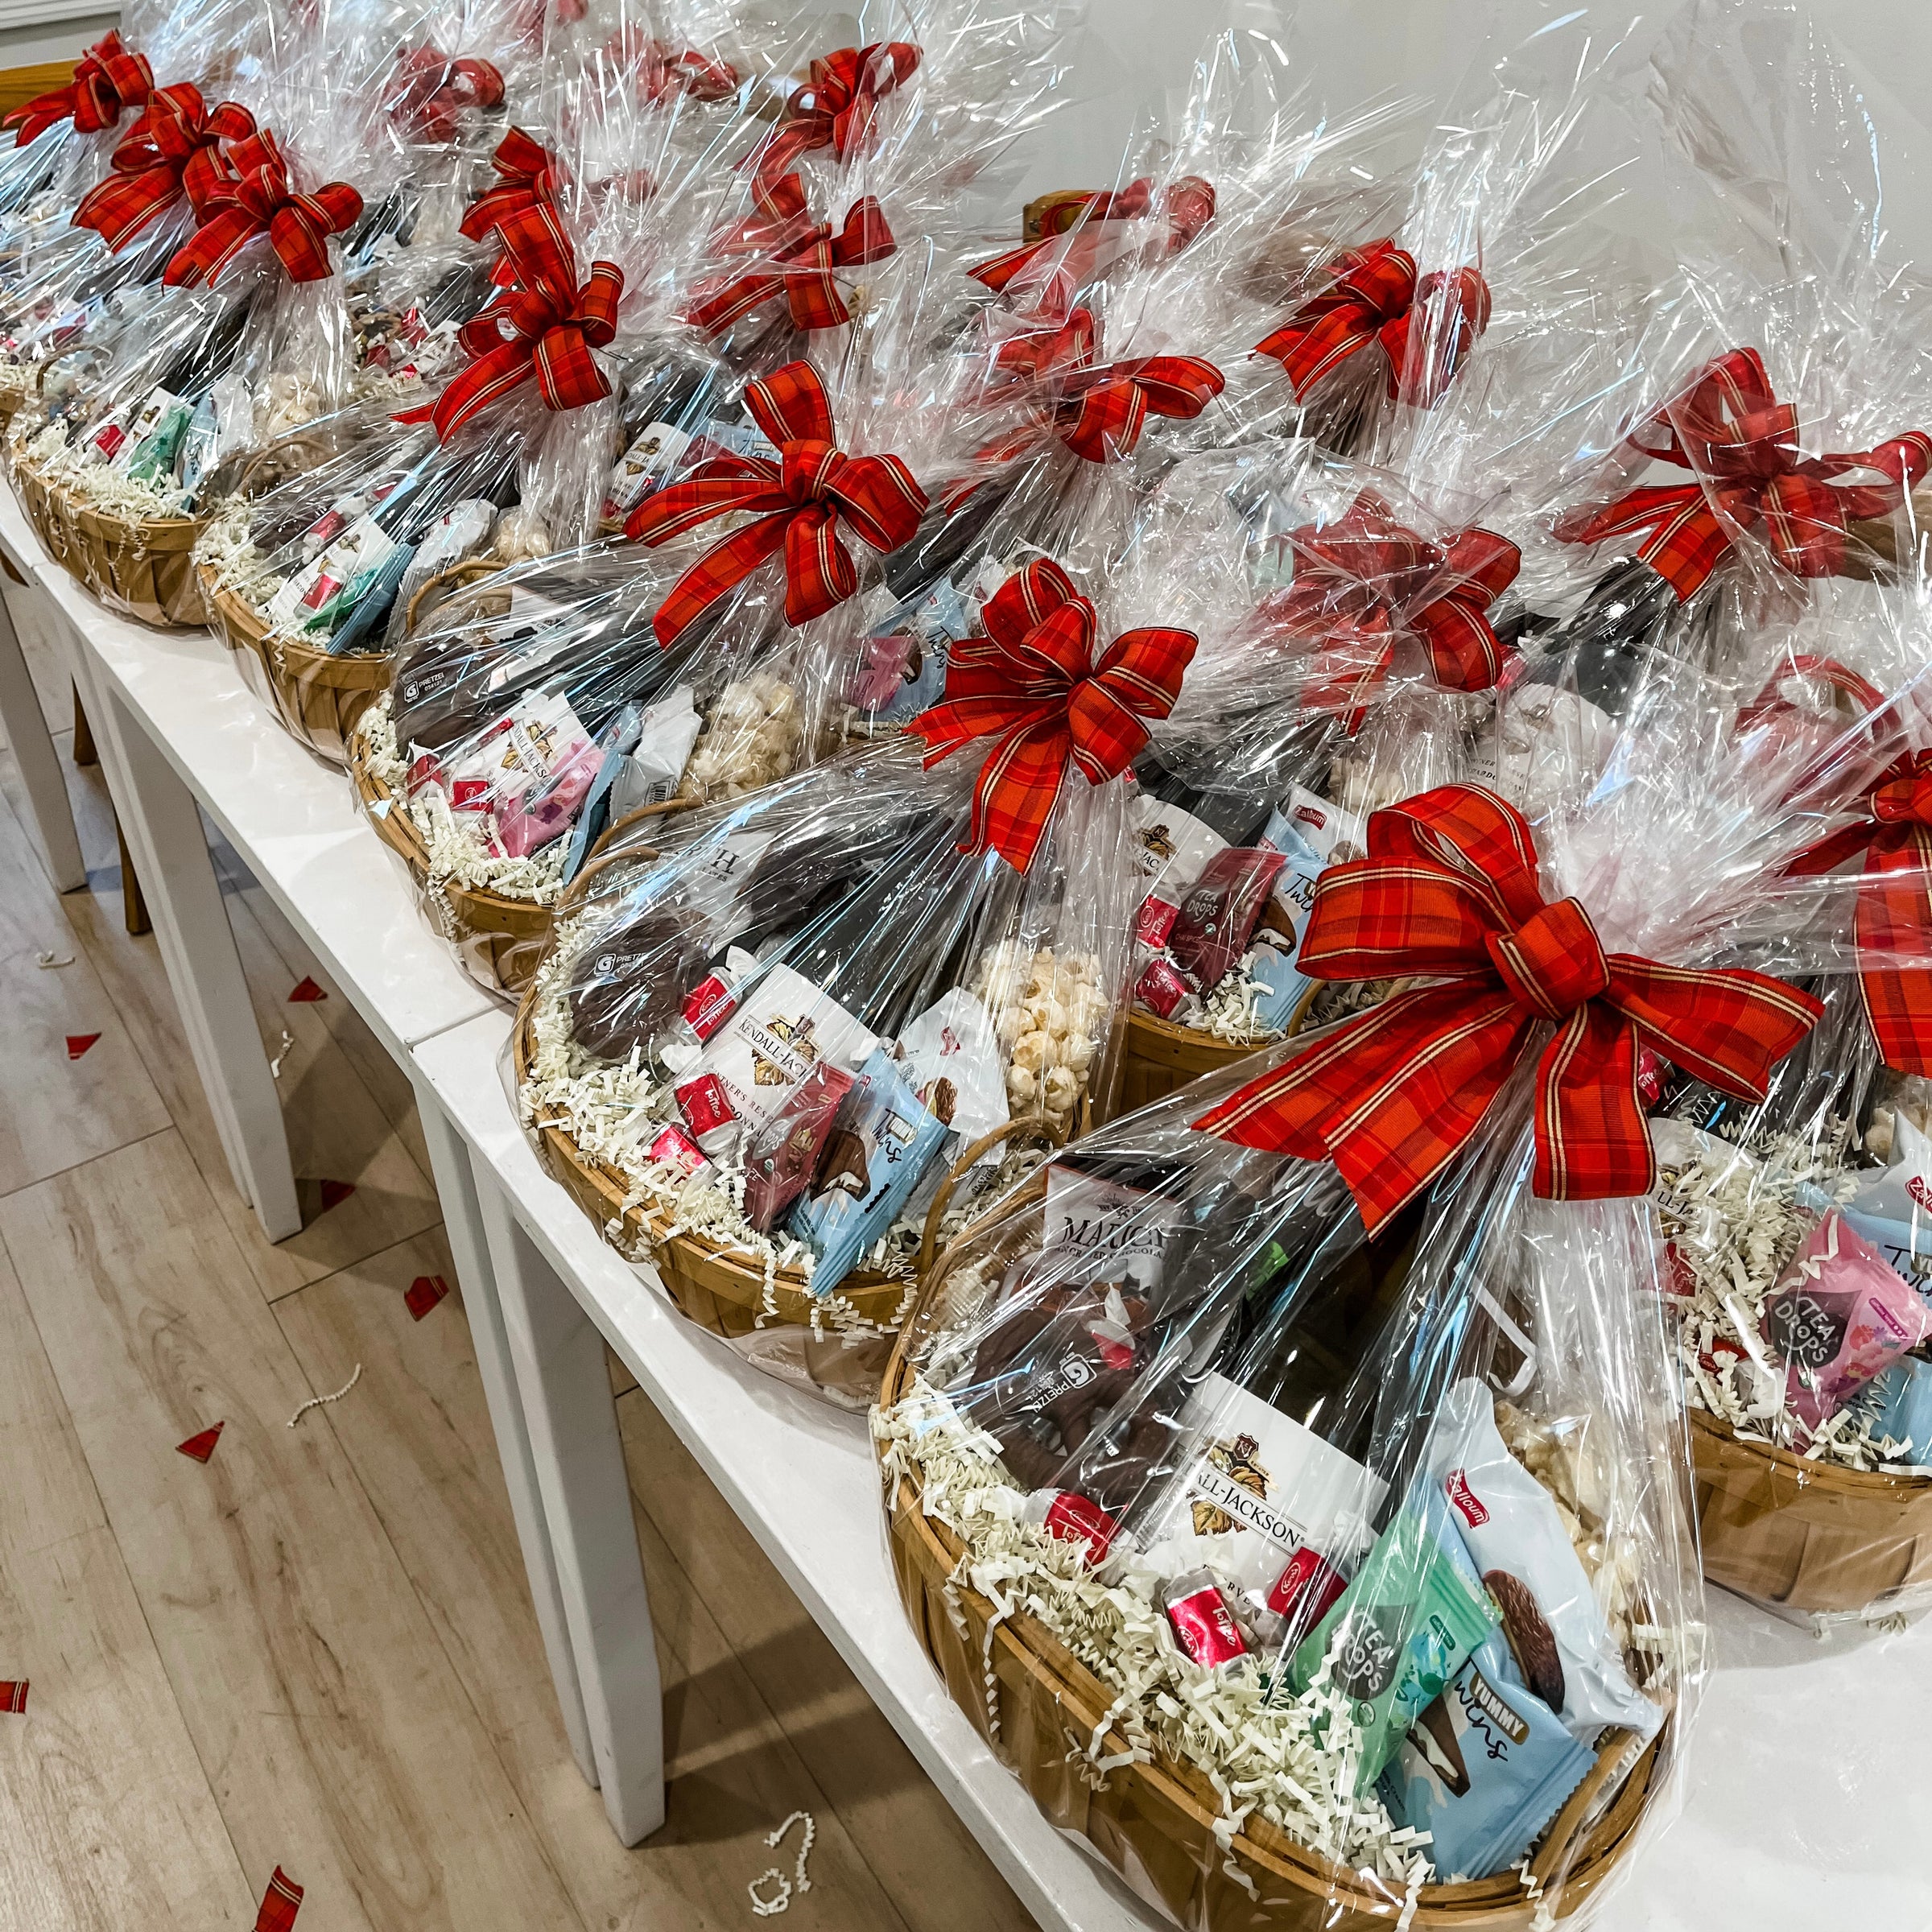 Corporate Holiday Gift Basket